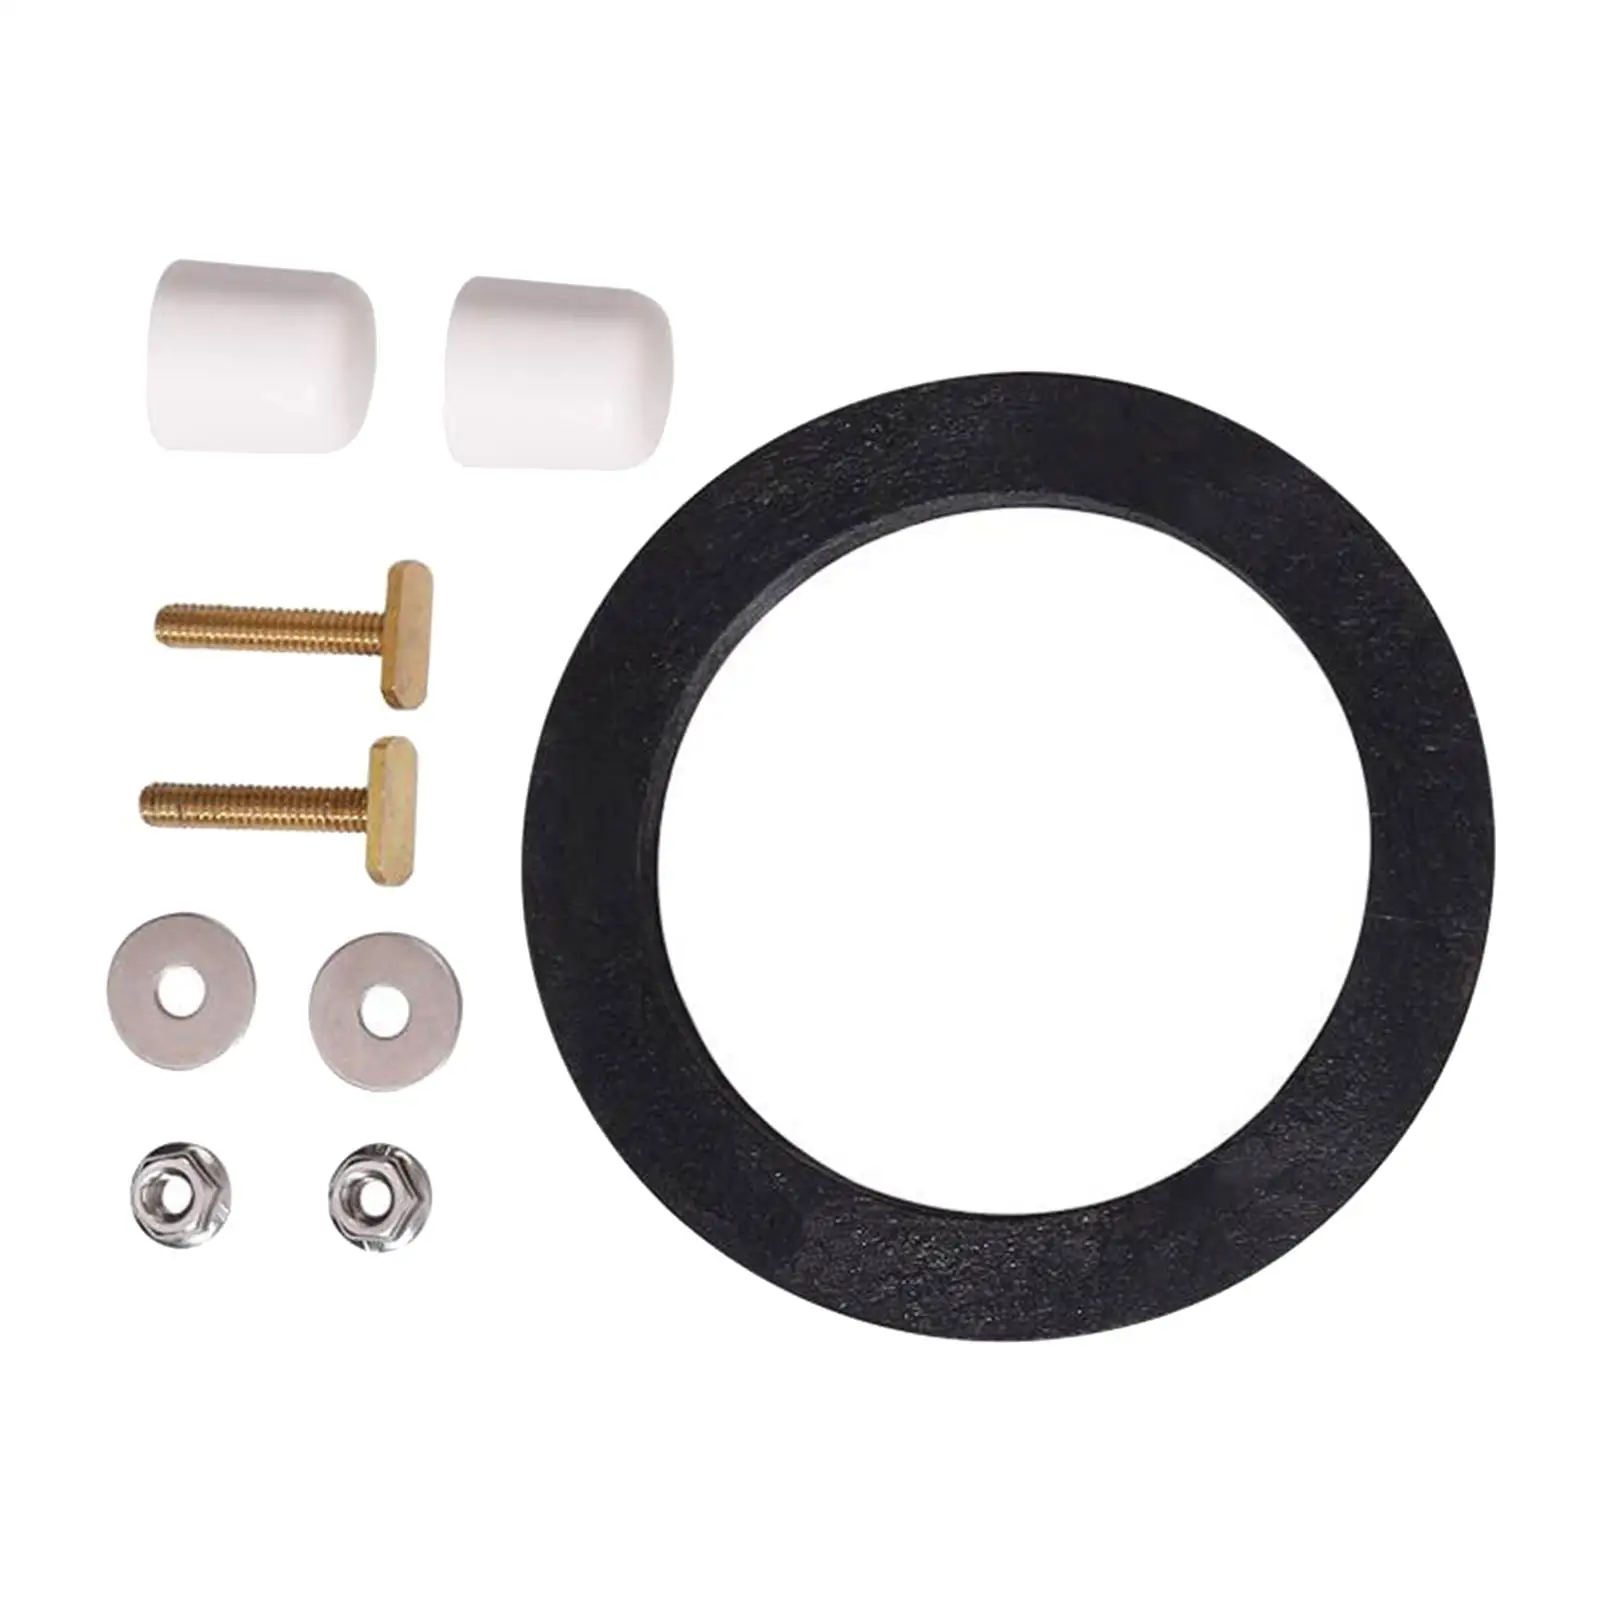 RV Toilet Seal Kit Mounting Hardware Gasket Replacement for Dometic 300 Series Professional Toilet Parts Easy Installation